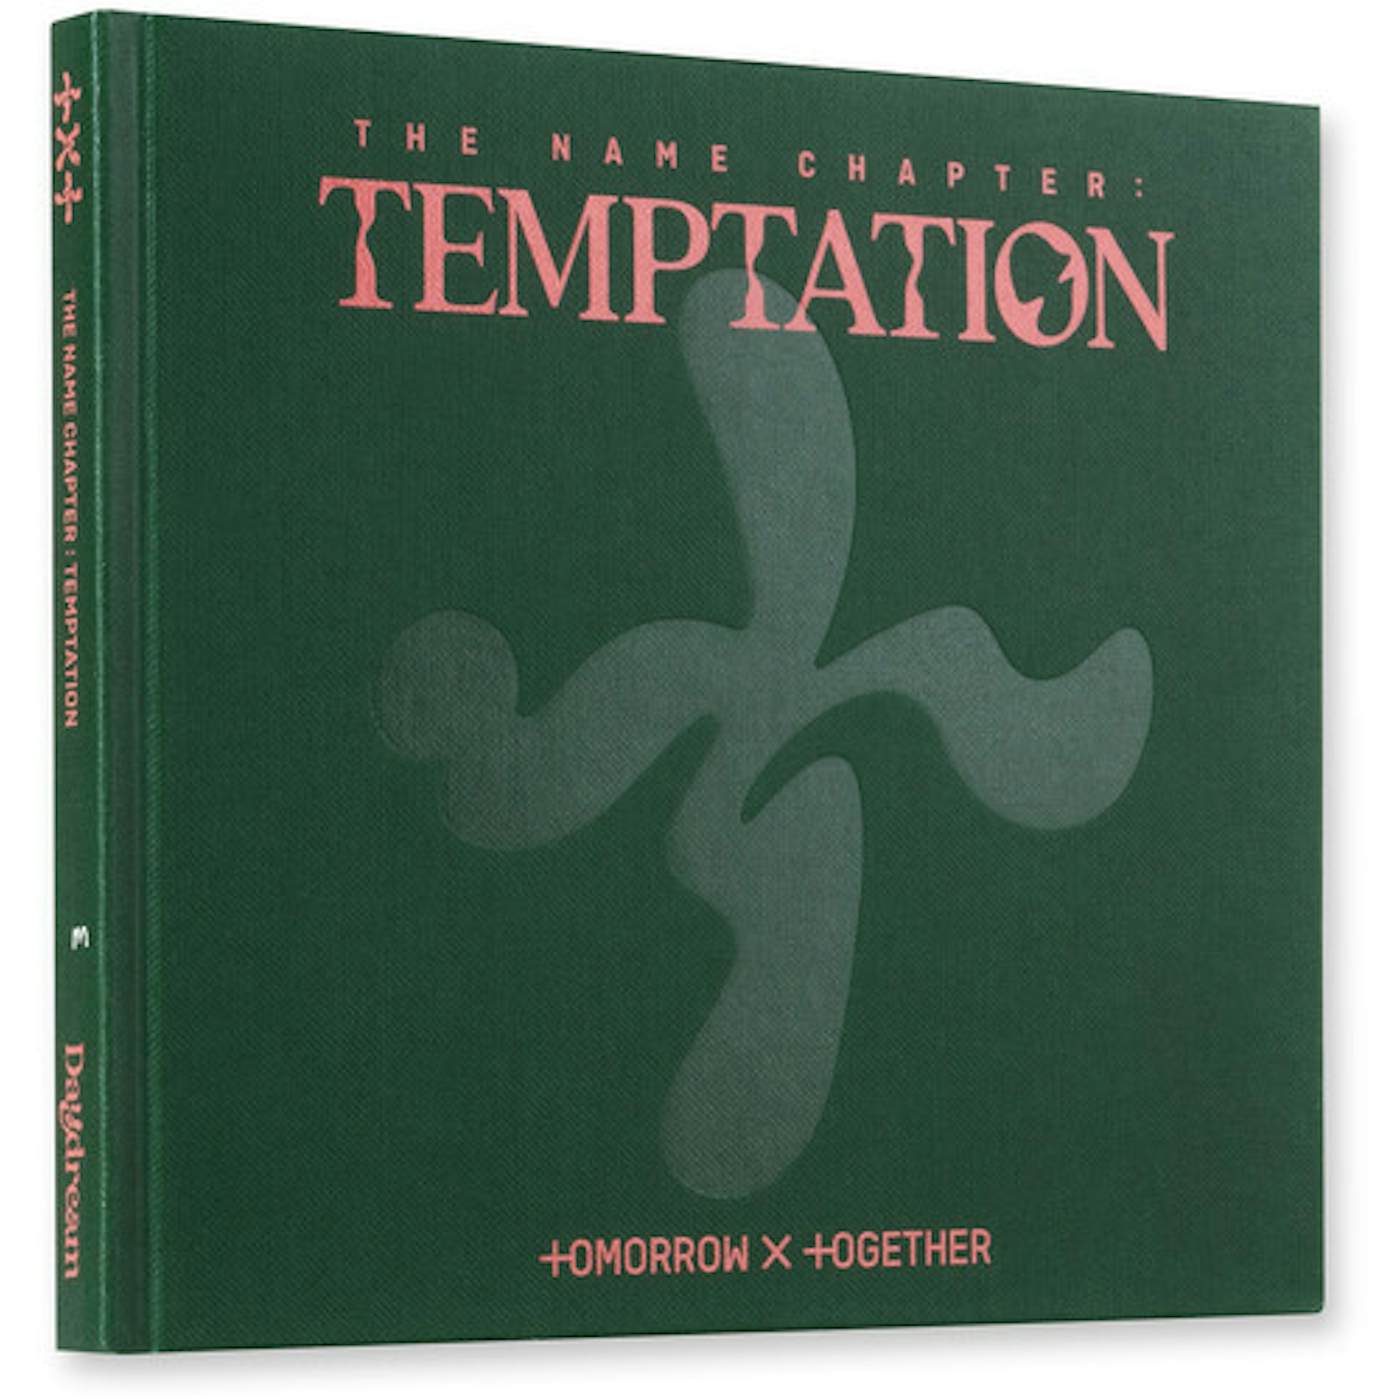 TOMORROW X TOGETHER NAME CHAPTER: TEMPTATION (DAYDREAM) CD